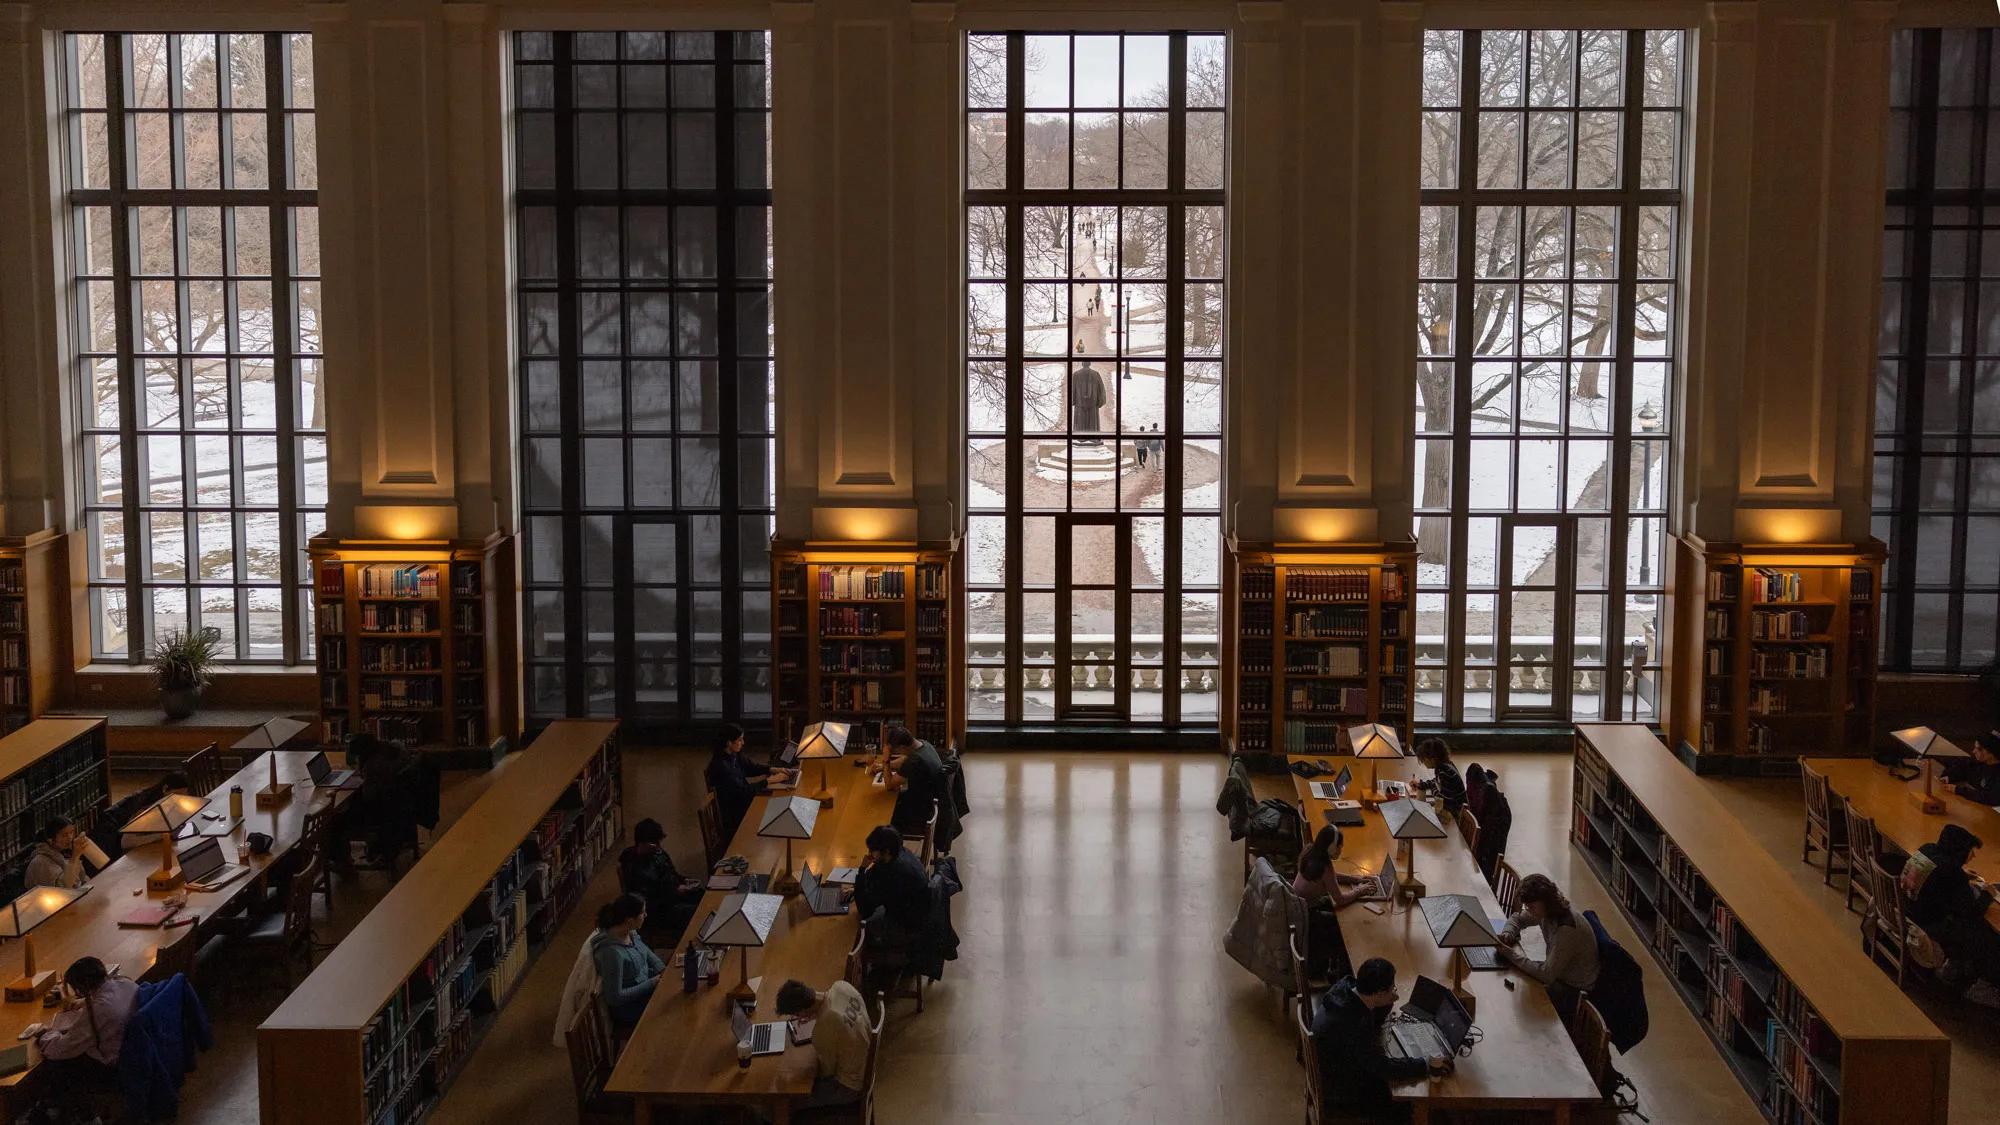 This photo, taken from high above students studying hard at long tables, shows—through tall windows—some the Oval’s iconic paths driving through the snow-covered grass sections. The light from the windows reflects off the floor and lamps here and there glow. 